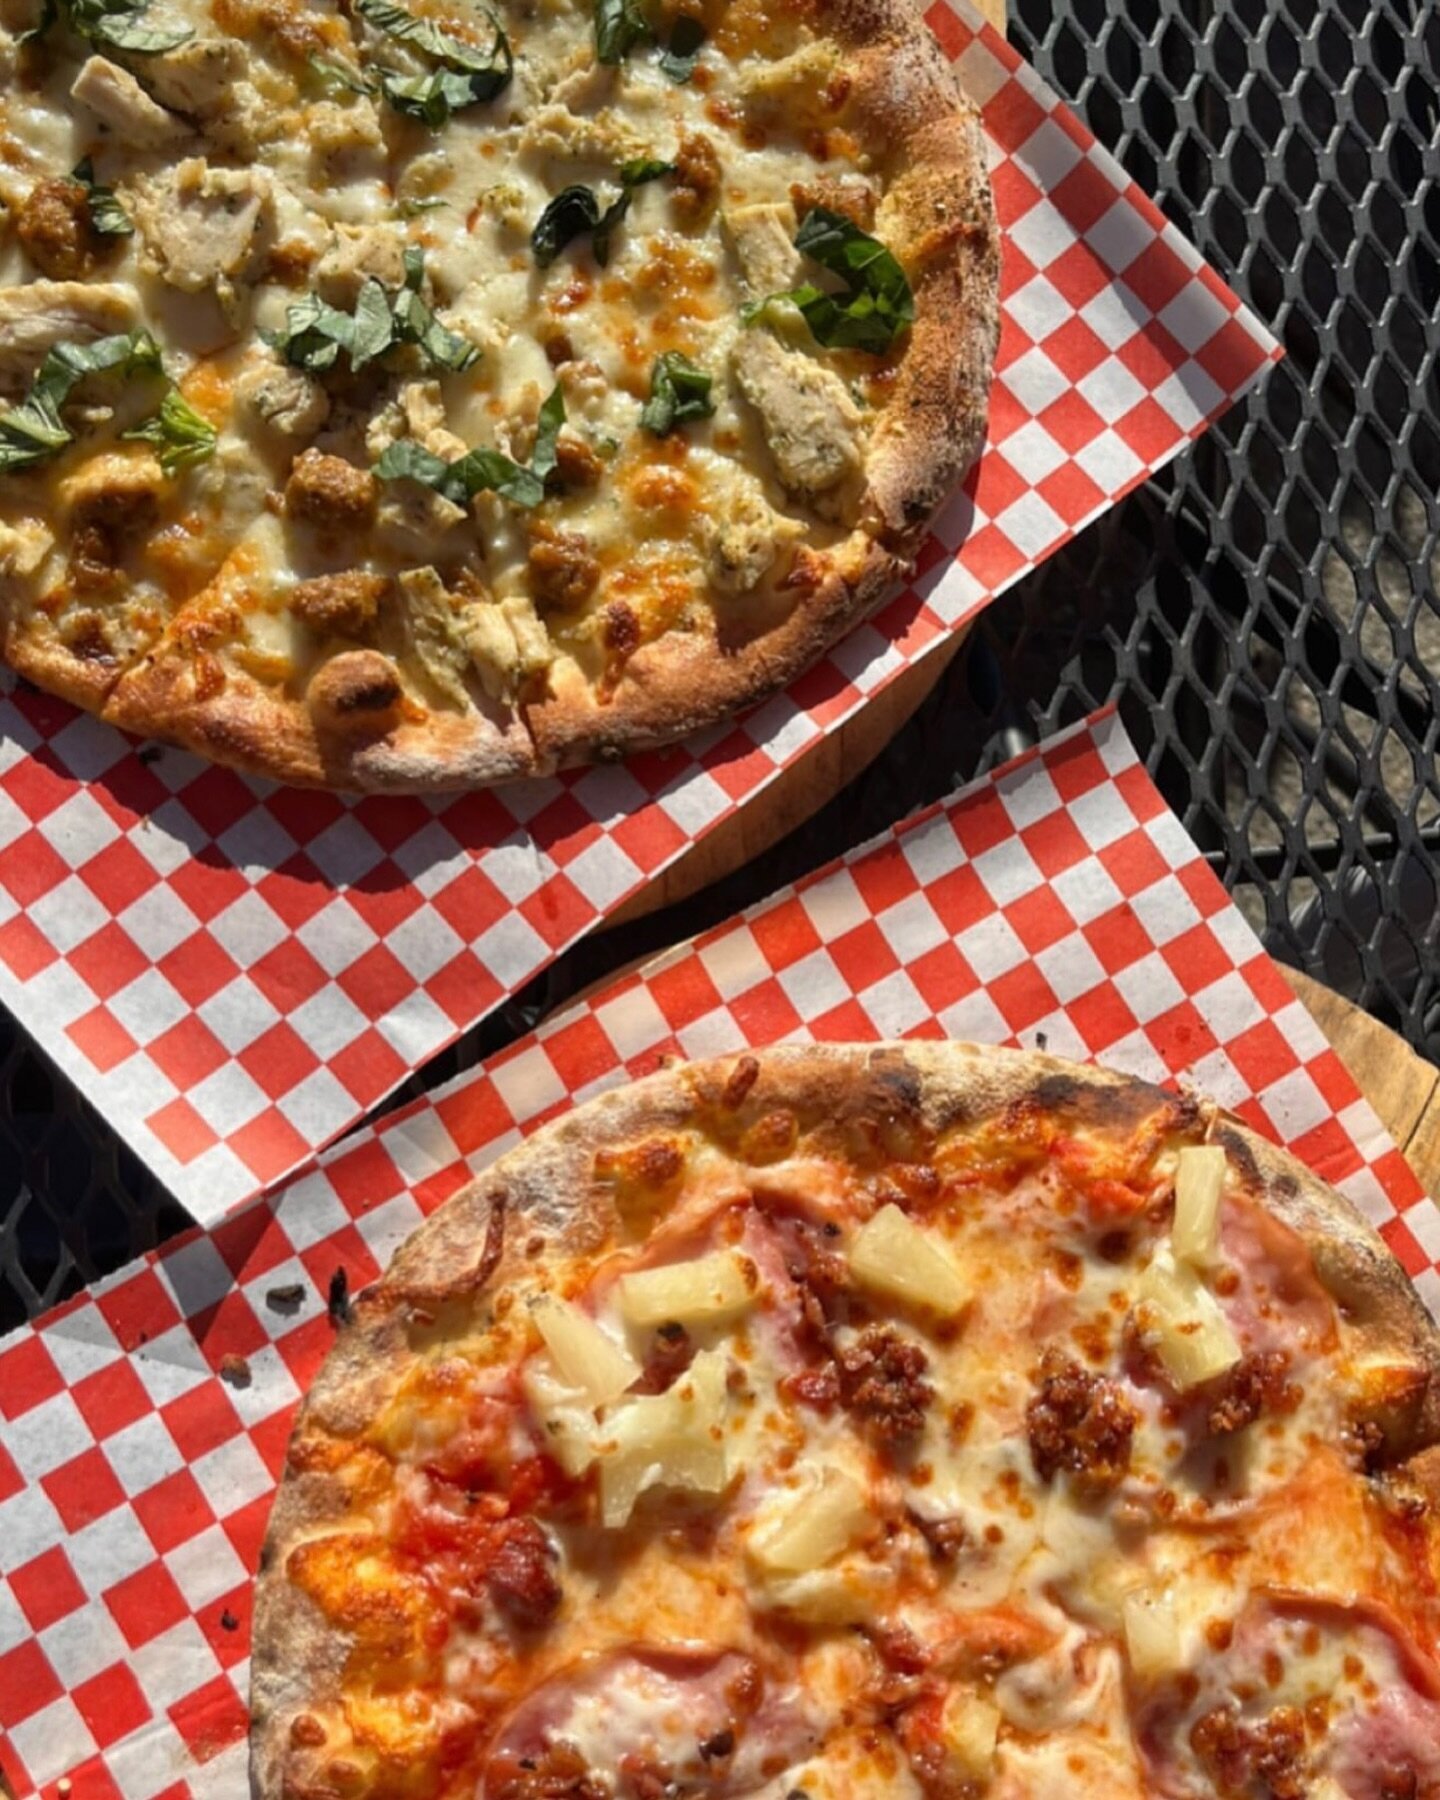 Fresh pies and #patioseating! ☀️ Get a little taste of #spring with #fatzachspizza!

fatzachspizza.com
.
.
.
.
#eatlocal #smallbusiness #downtown #smallbusiness #puyallup #pnw #pizza #yummy #instagood  #food #foodporn #catering #mobile #sumner #photo